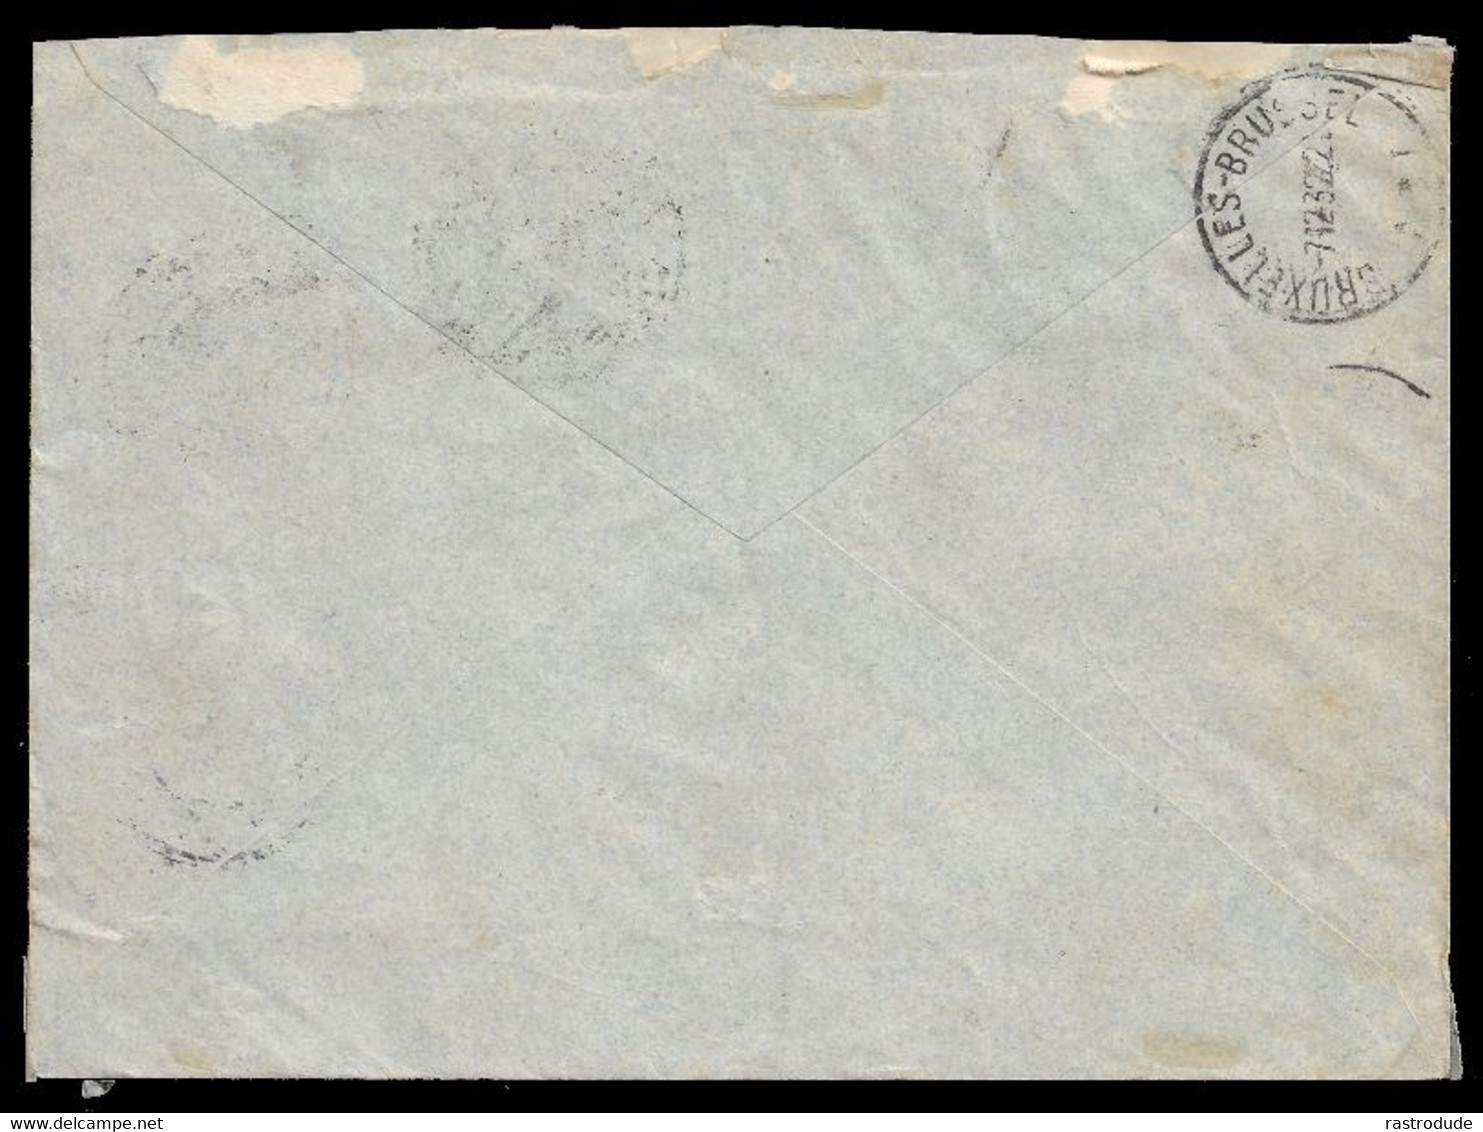 1932 AIRMAIL FLUGPOST - MIXED FRANKING BELGIUM LUXEMBURG TO UK - Yv. 2,3,4,5 + Yv. 1 - Covers & Documents